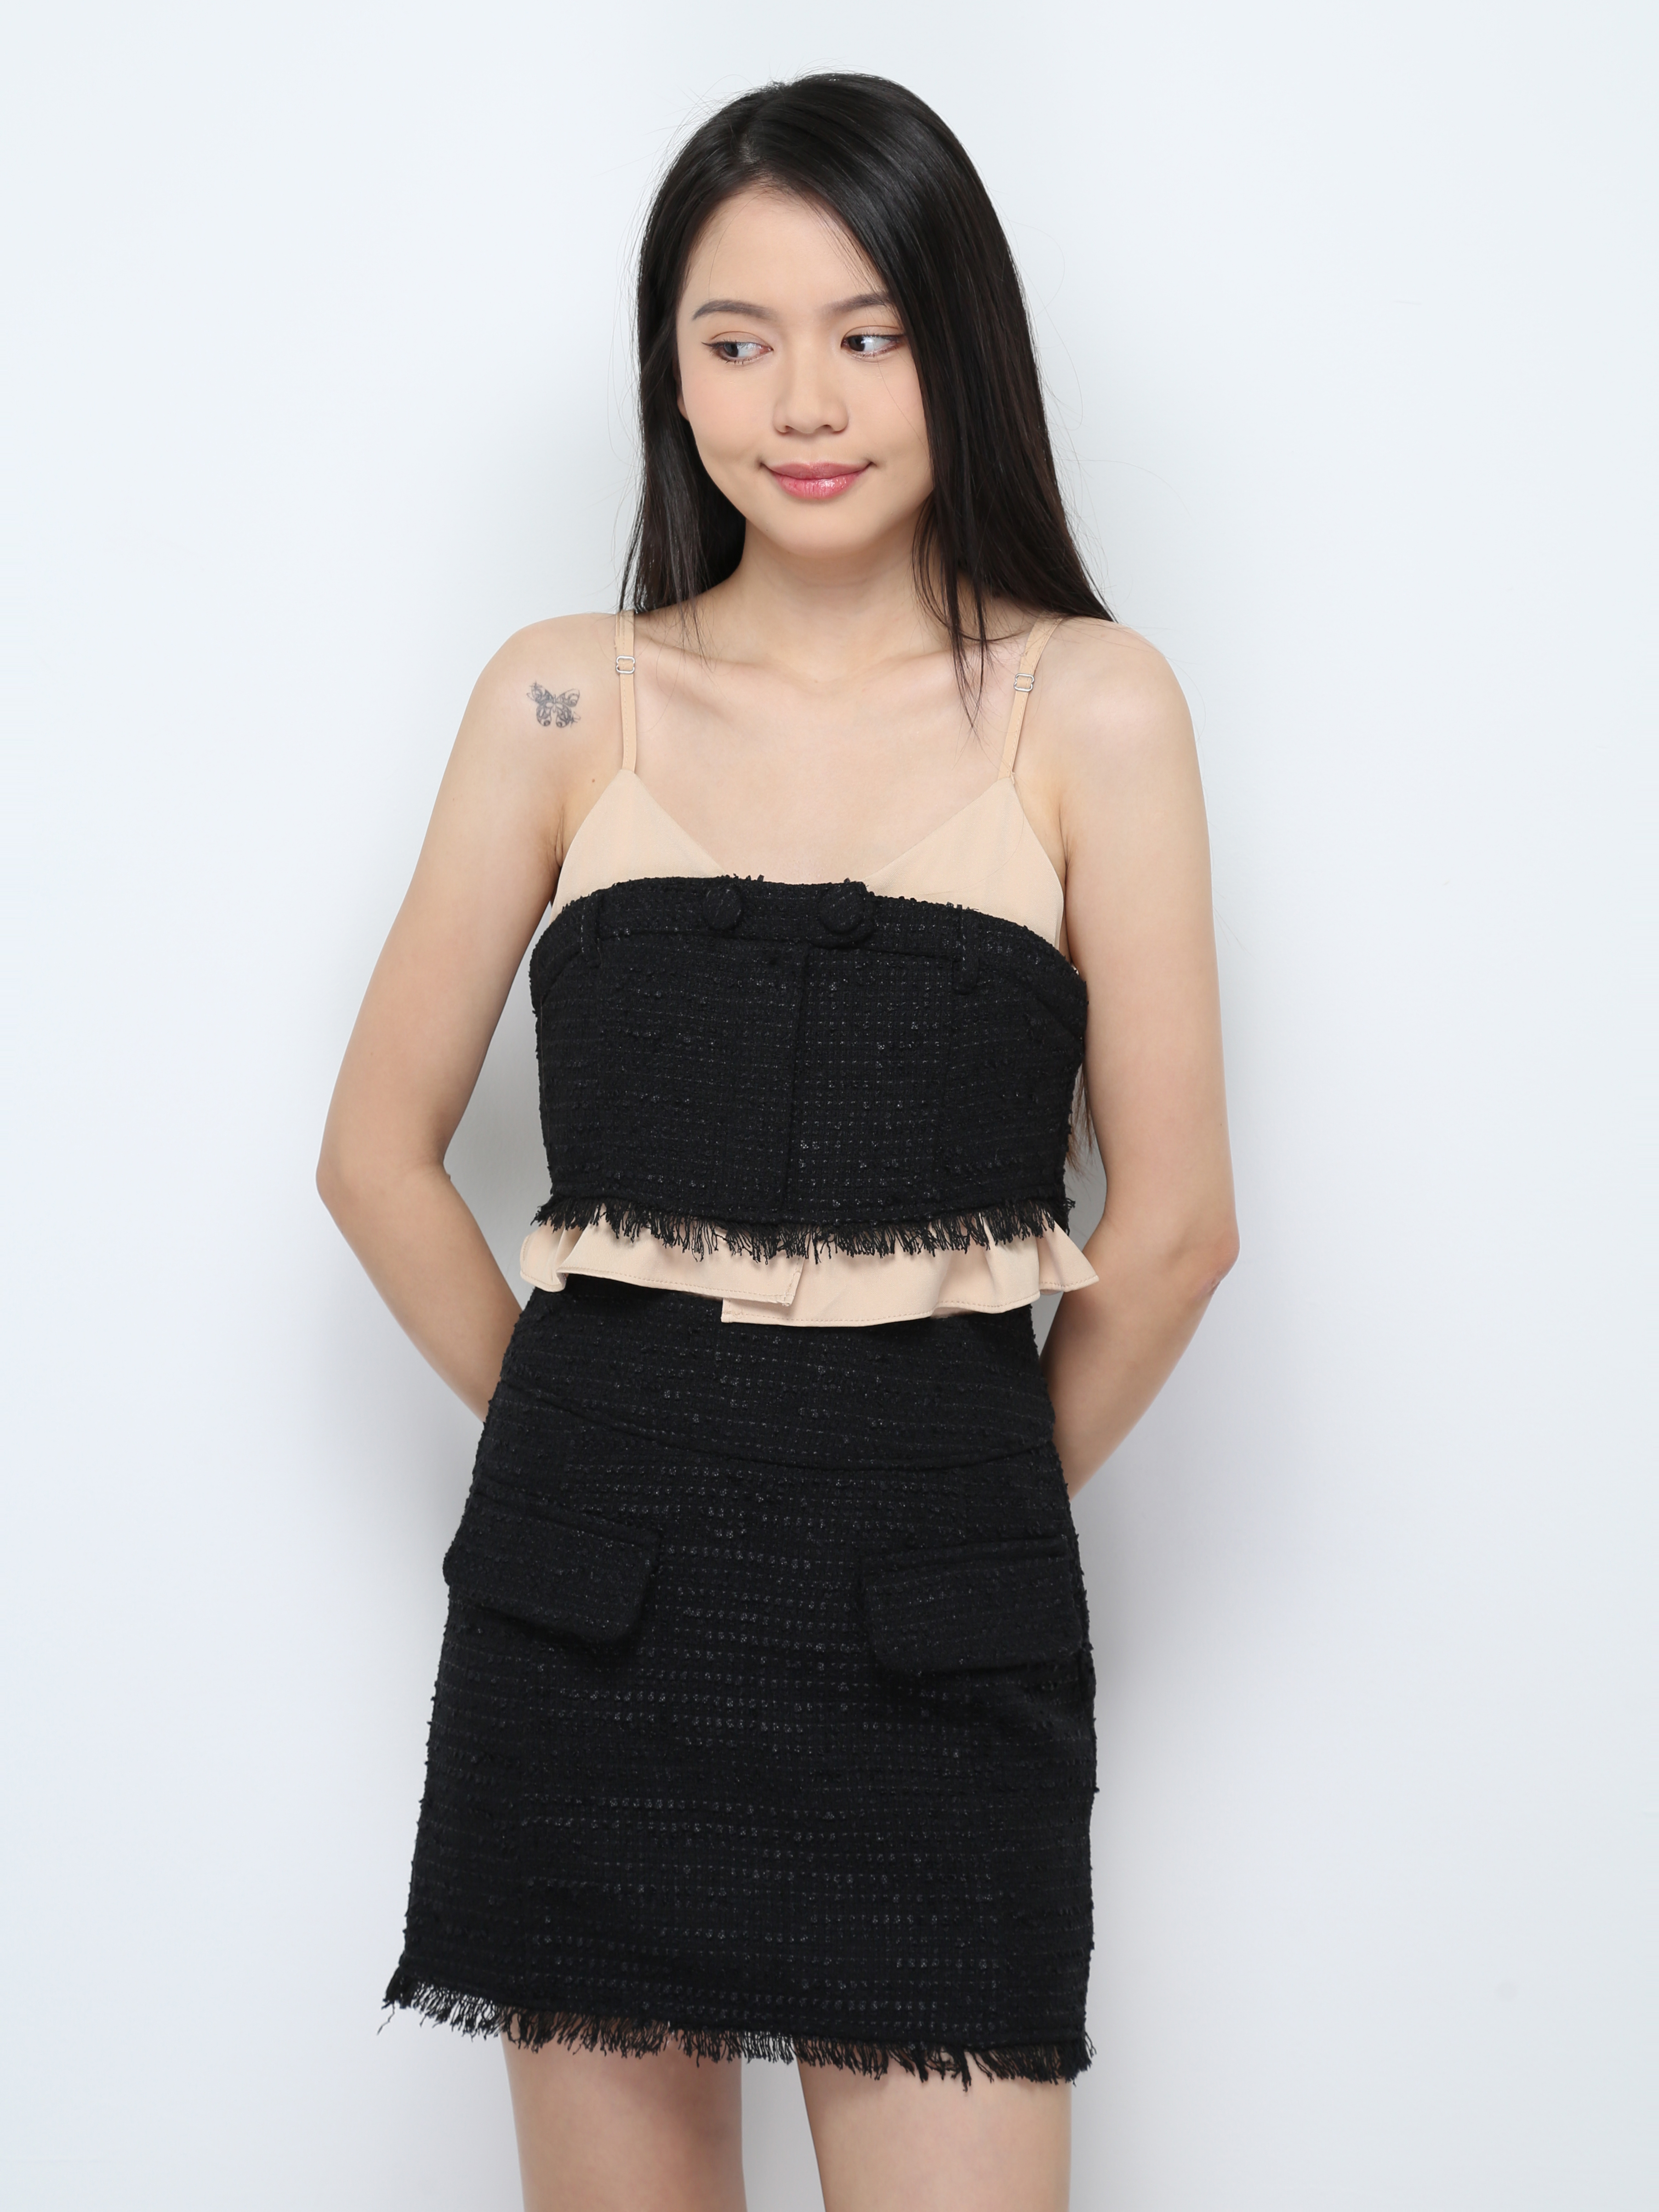 Chanel Style Sleeveless Crop Top With Skirt Set 27325